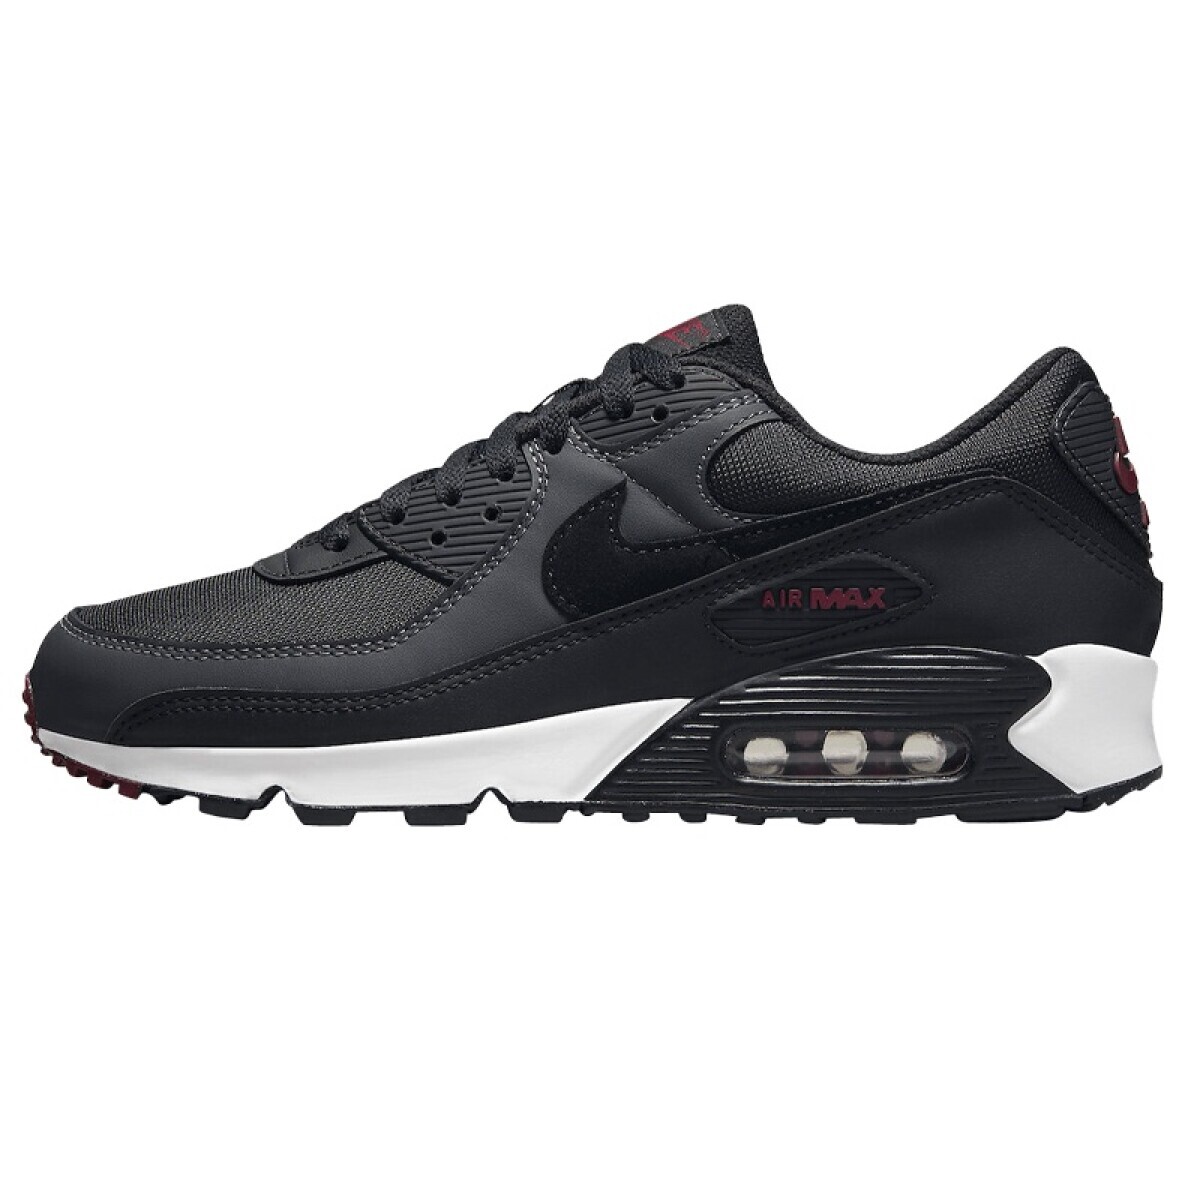 Champion Nike Hombre Air Max 90 Anthrct - S/C 